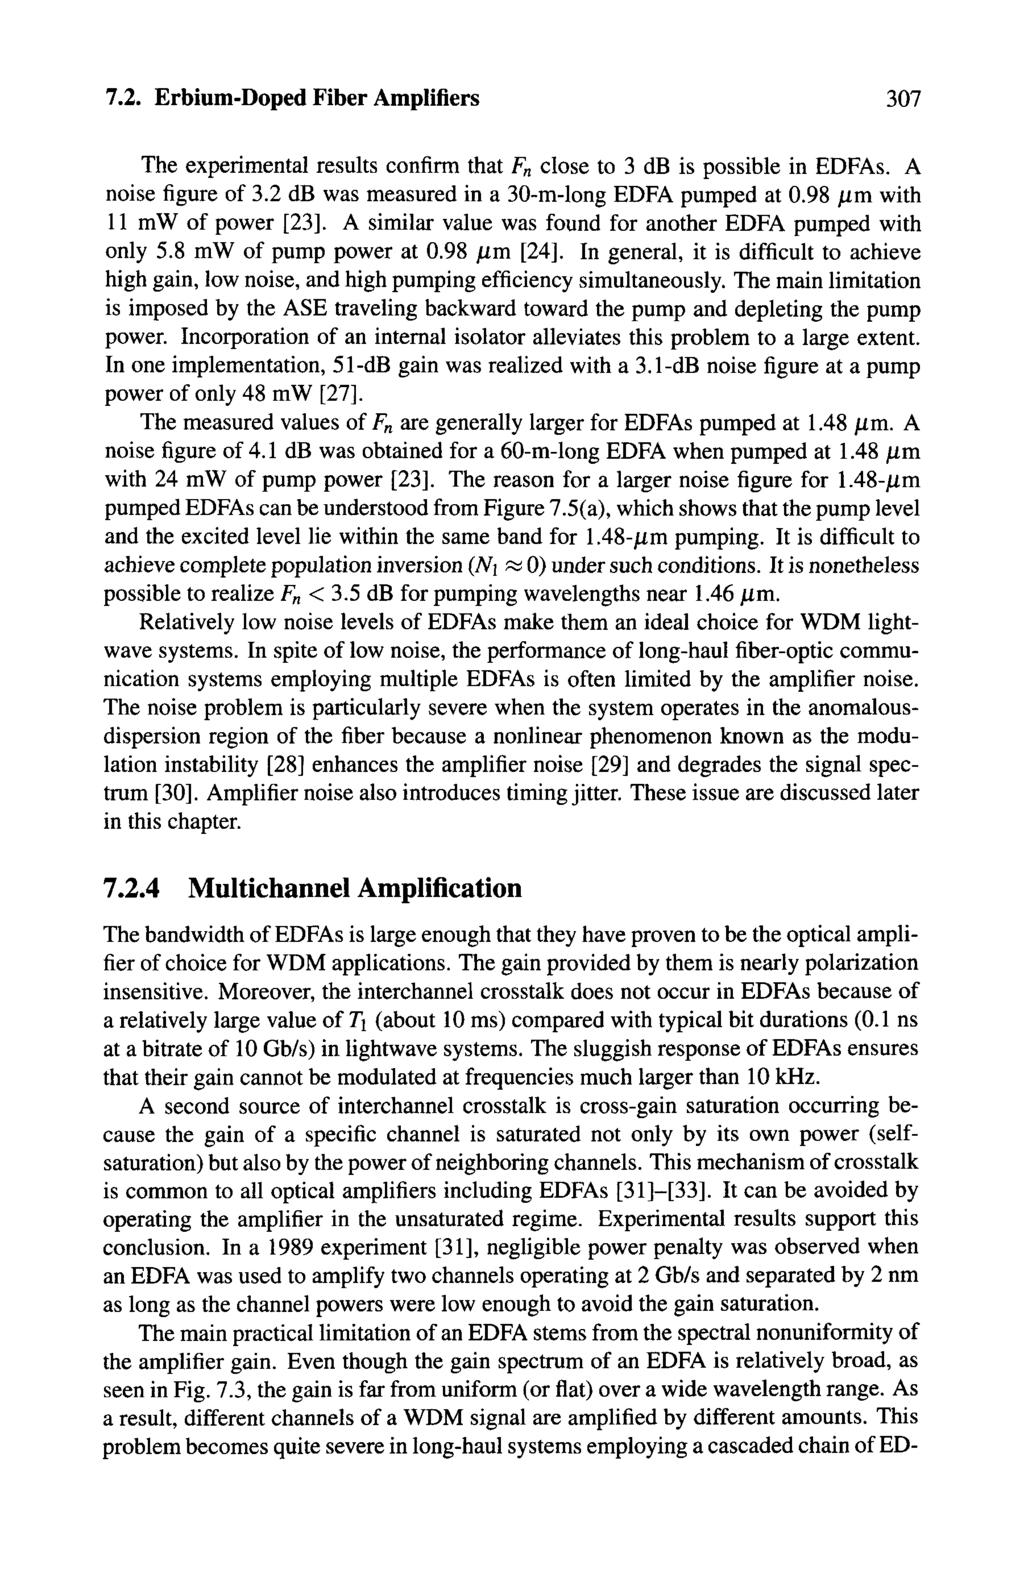 7.2. Erbium-Doped Fiber Amplifiers 307 The experimental results confirm that F n close to 3 db is possible in EDFAs. A noise figure of 3.2 db was measured in a 30-m-long EDFA pumped at 0.